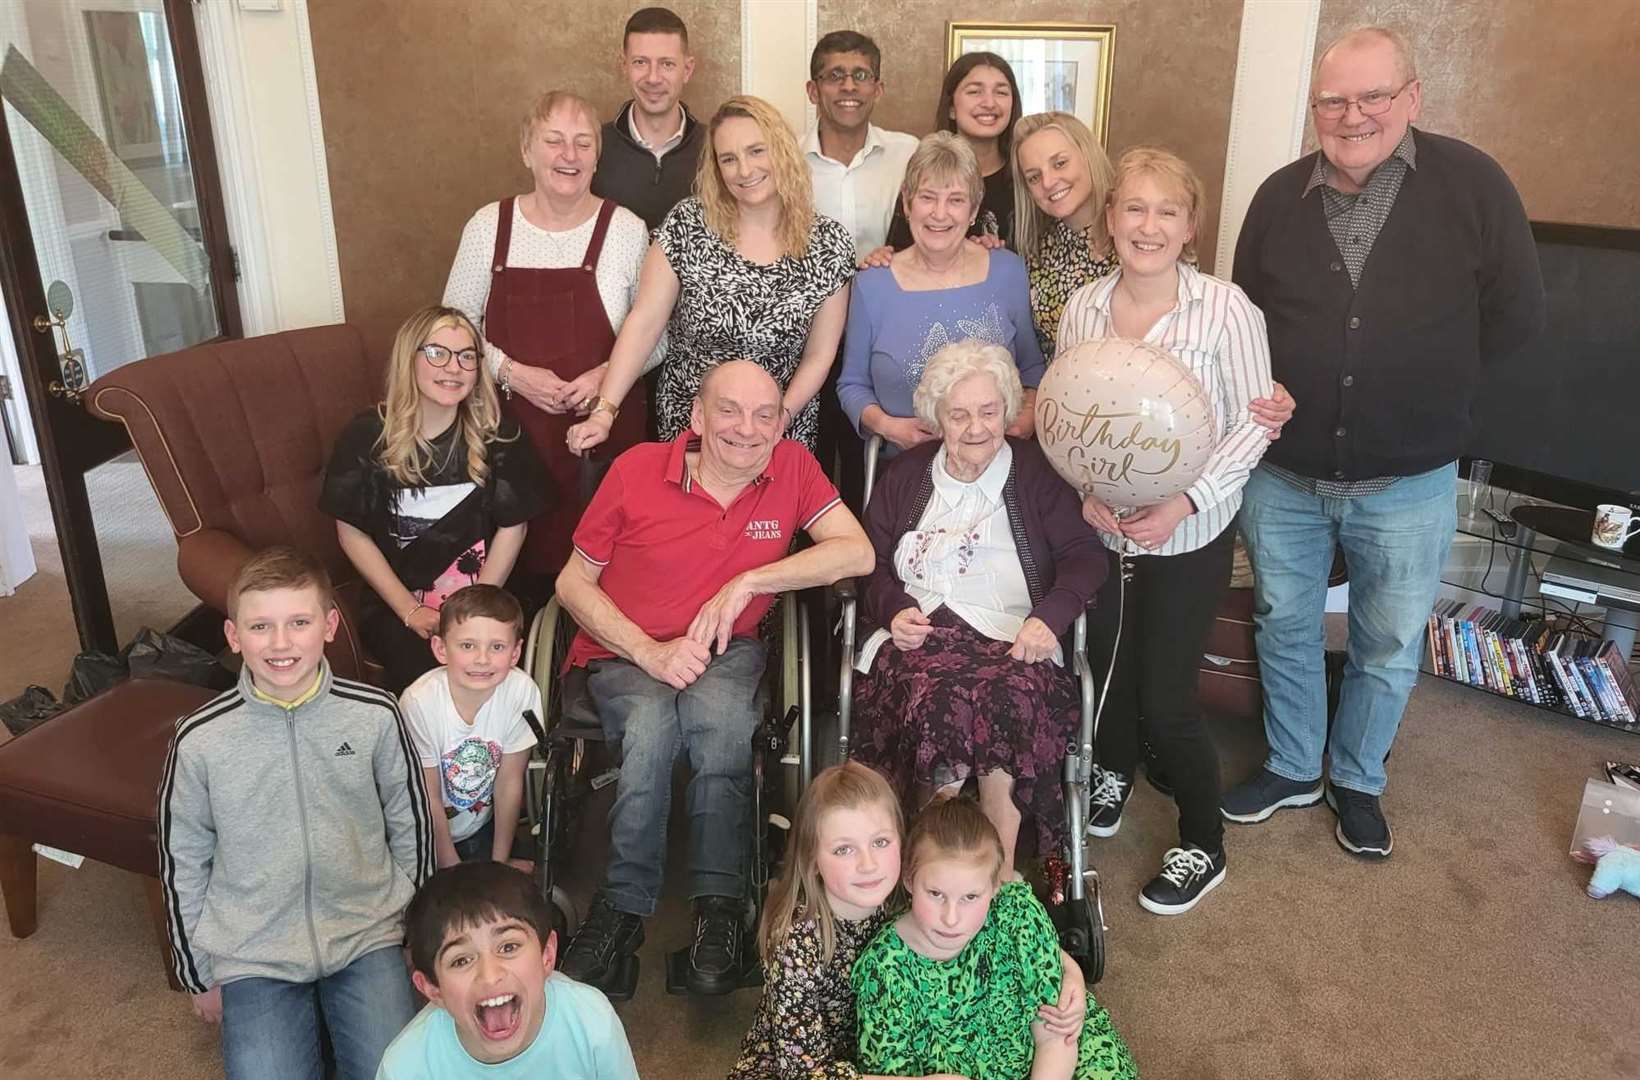 Blanche Eldridge celebrated her 102nd birthday with all her family at her care home in Sutton-at-Hone